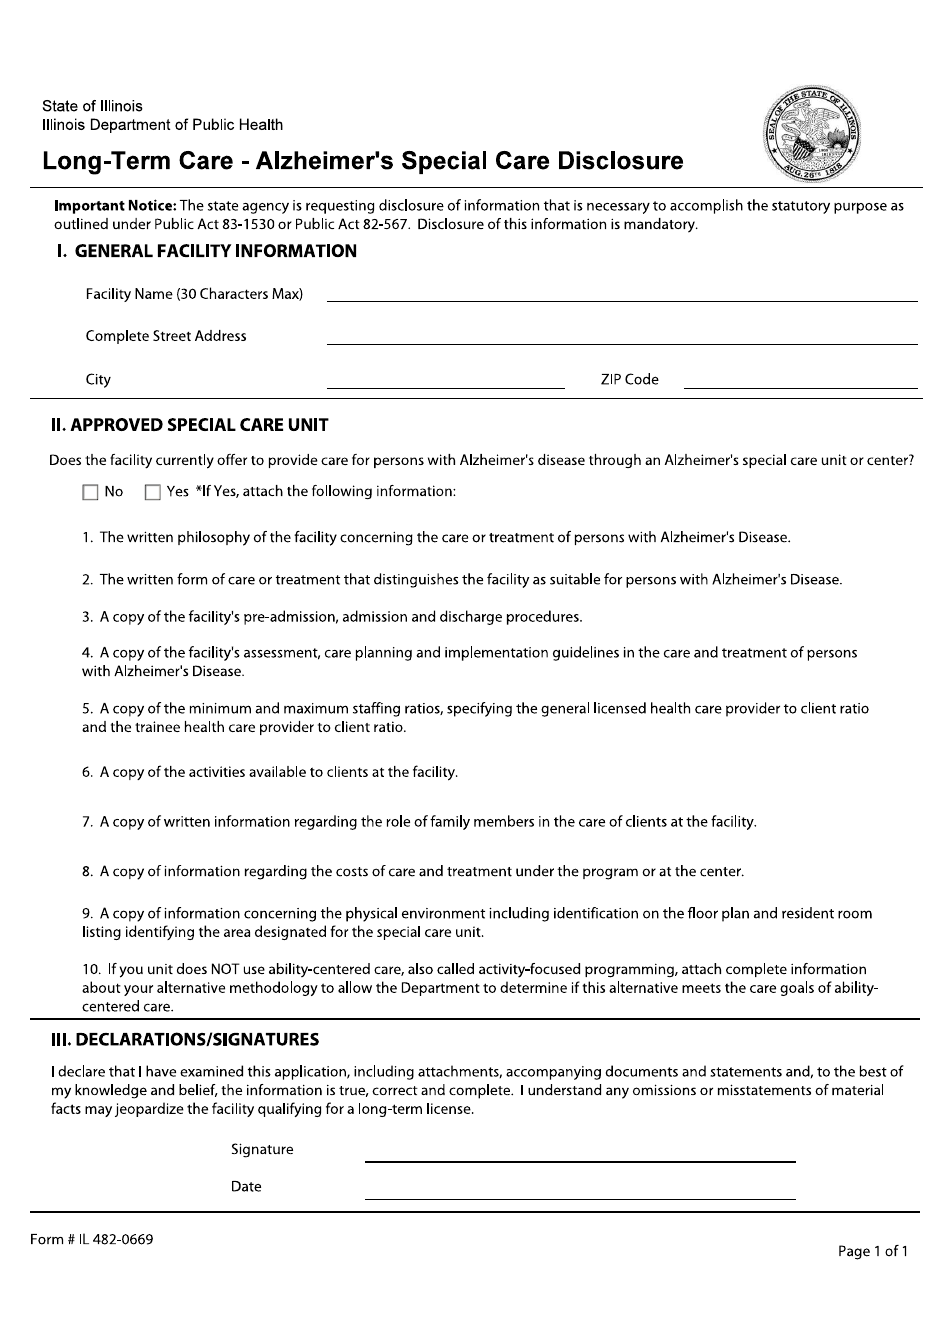 Form IL482-0669 Long-Term Care - Alzheimer's Special Care Disclosure - Illinois, Page 1